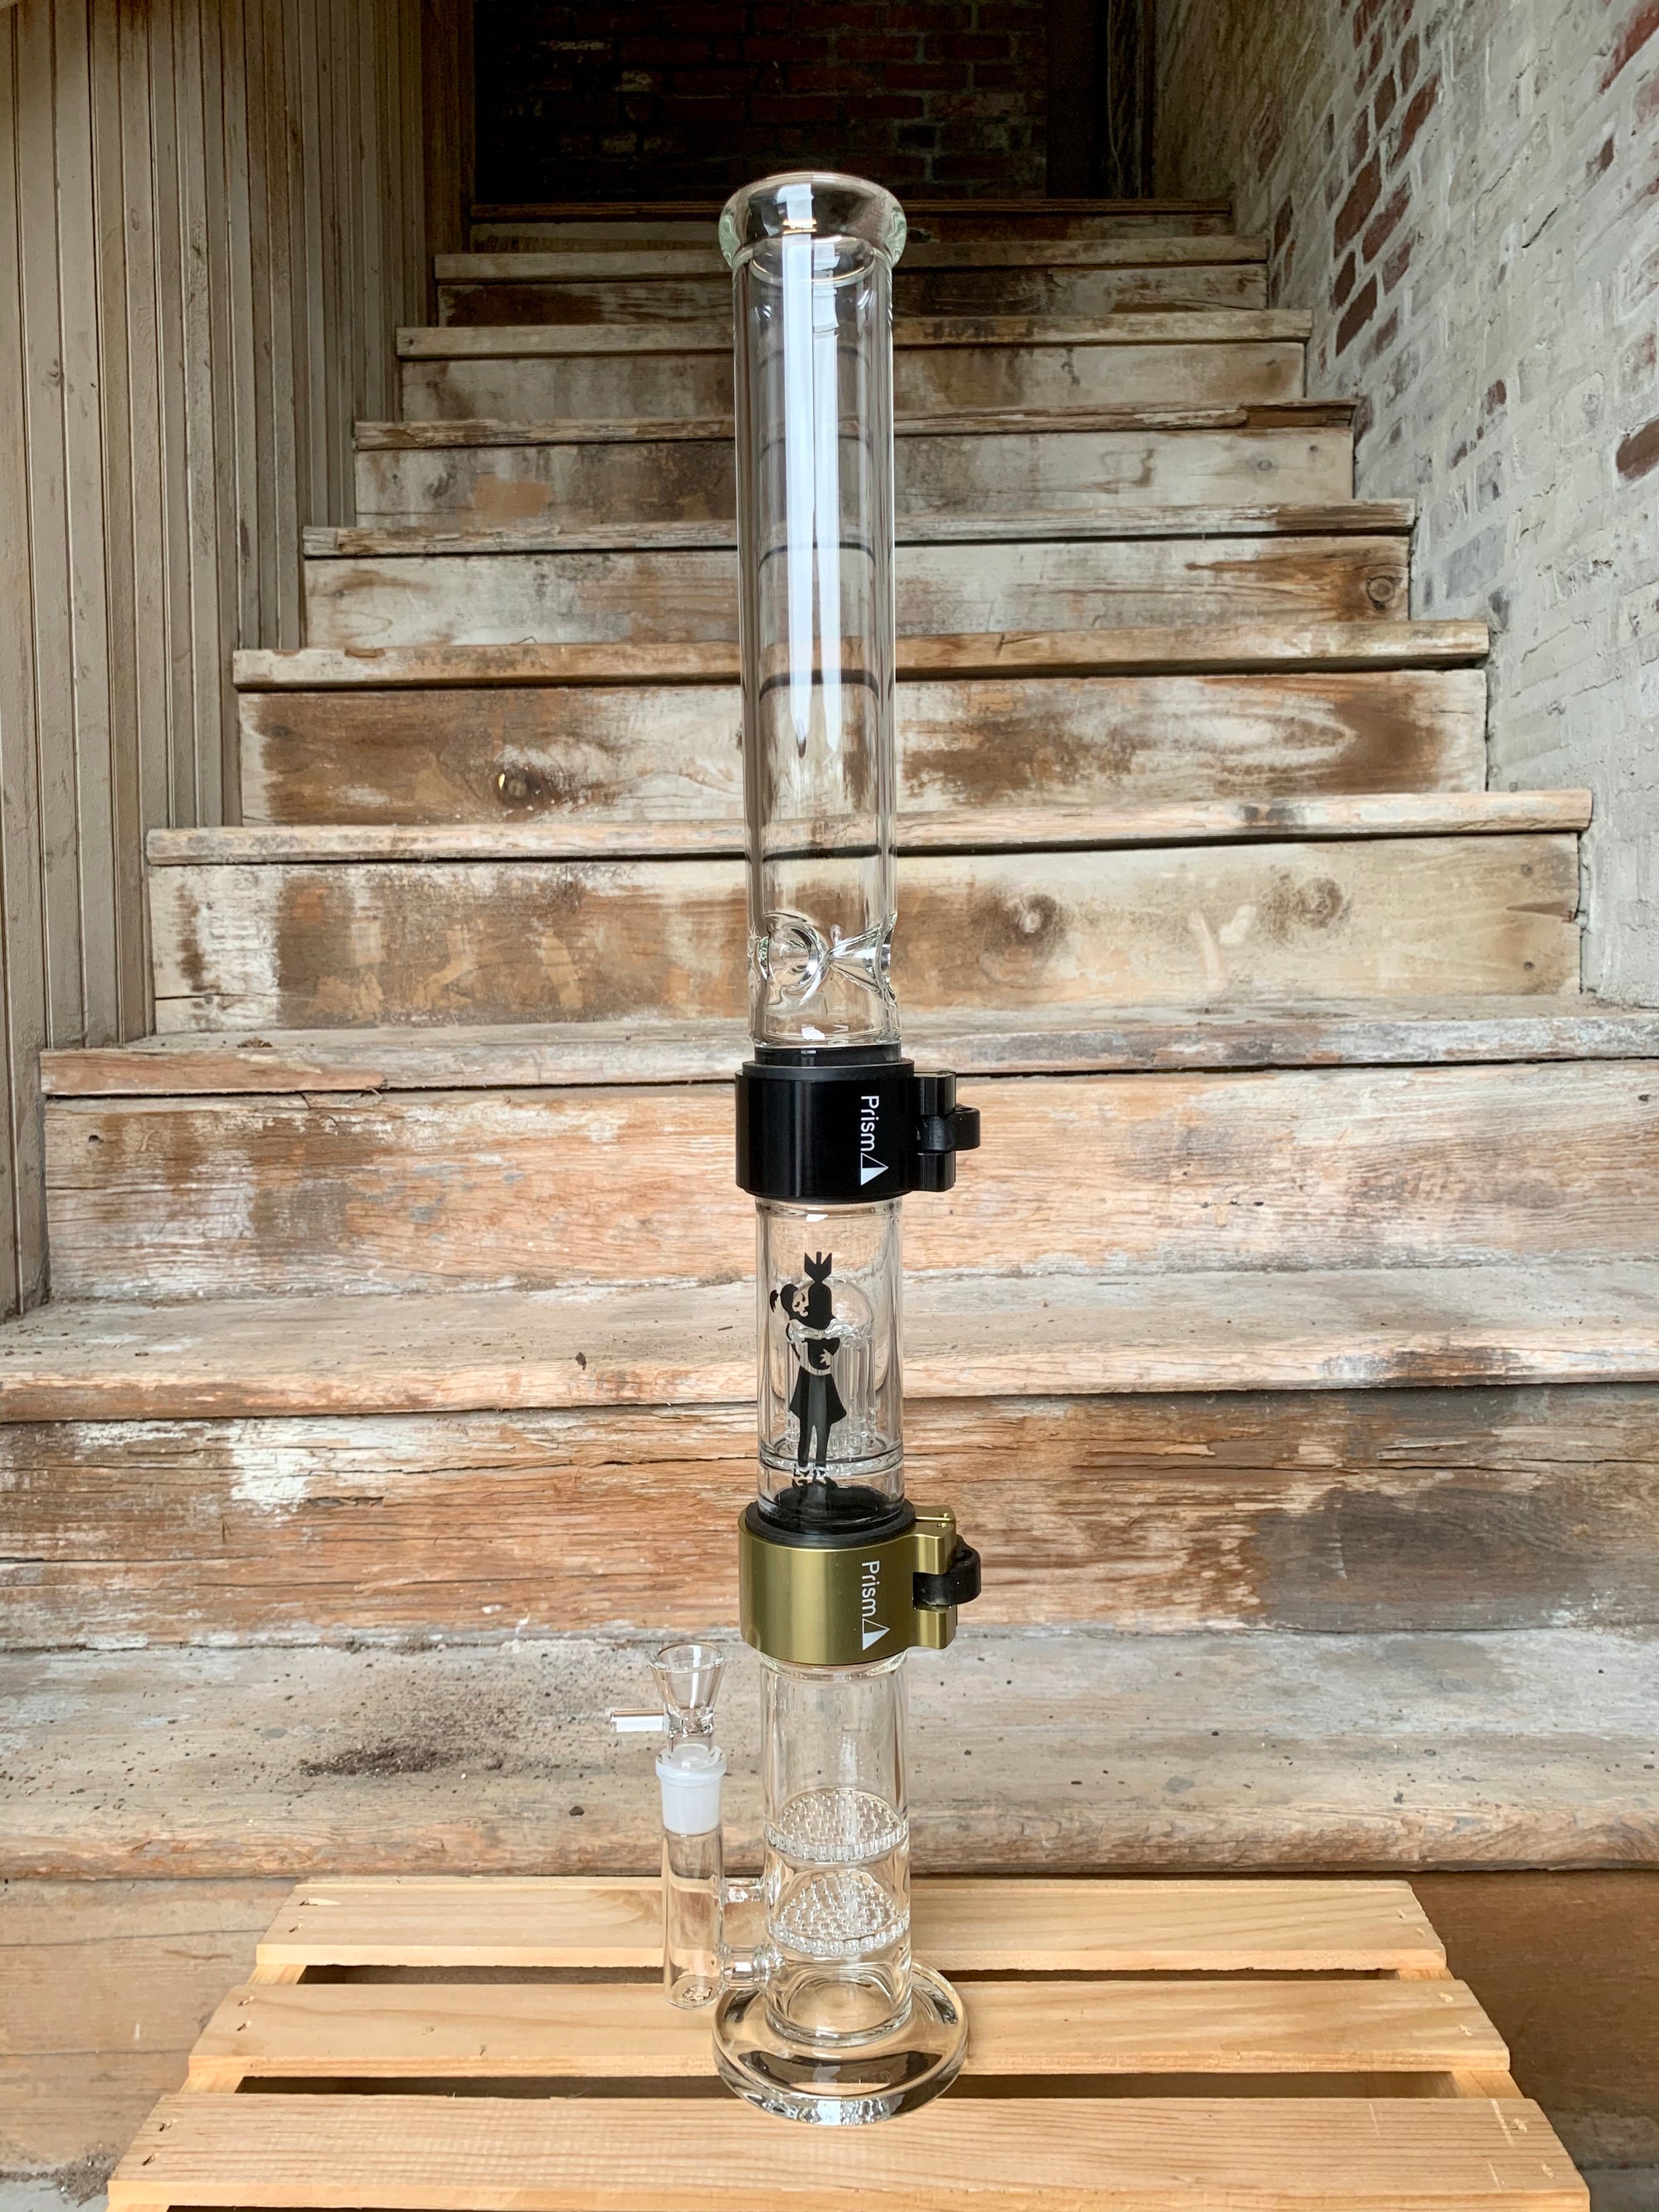 Prism addresses the issues of traditional waterpipes making a custom bong possible. With a variety of bong styles you can create your own custom bong whether its a tall bong or small bong. Also, it’s now easy to clean your bong and travel with your bong.